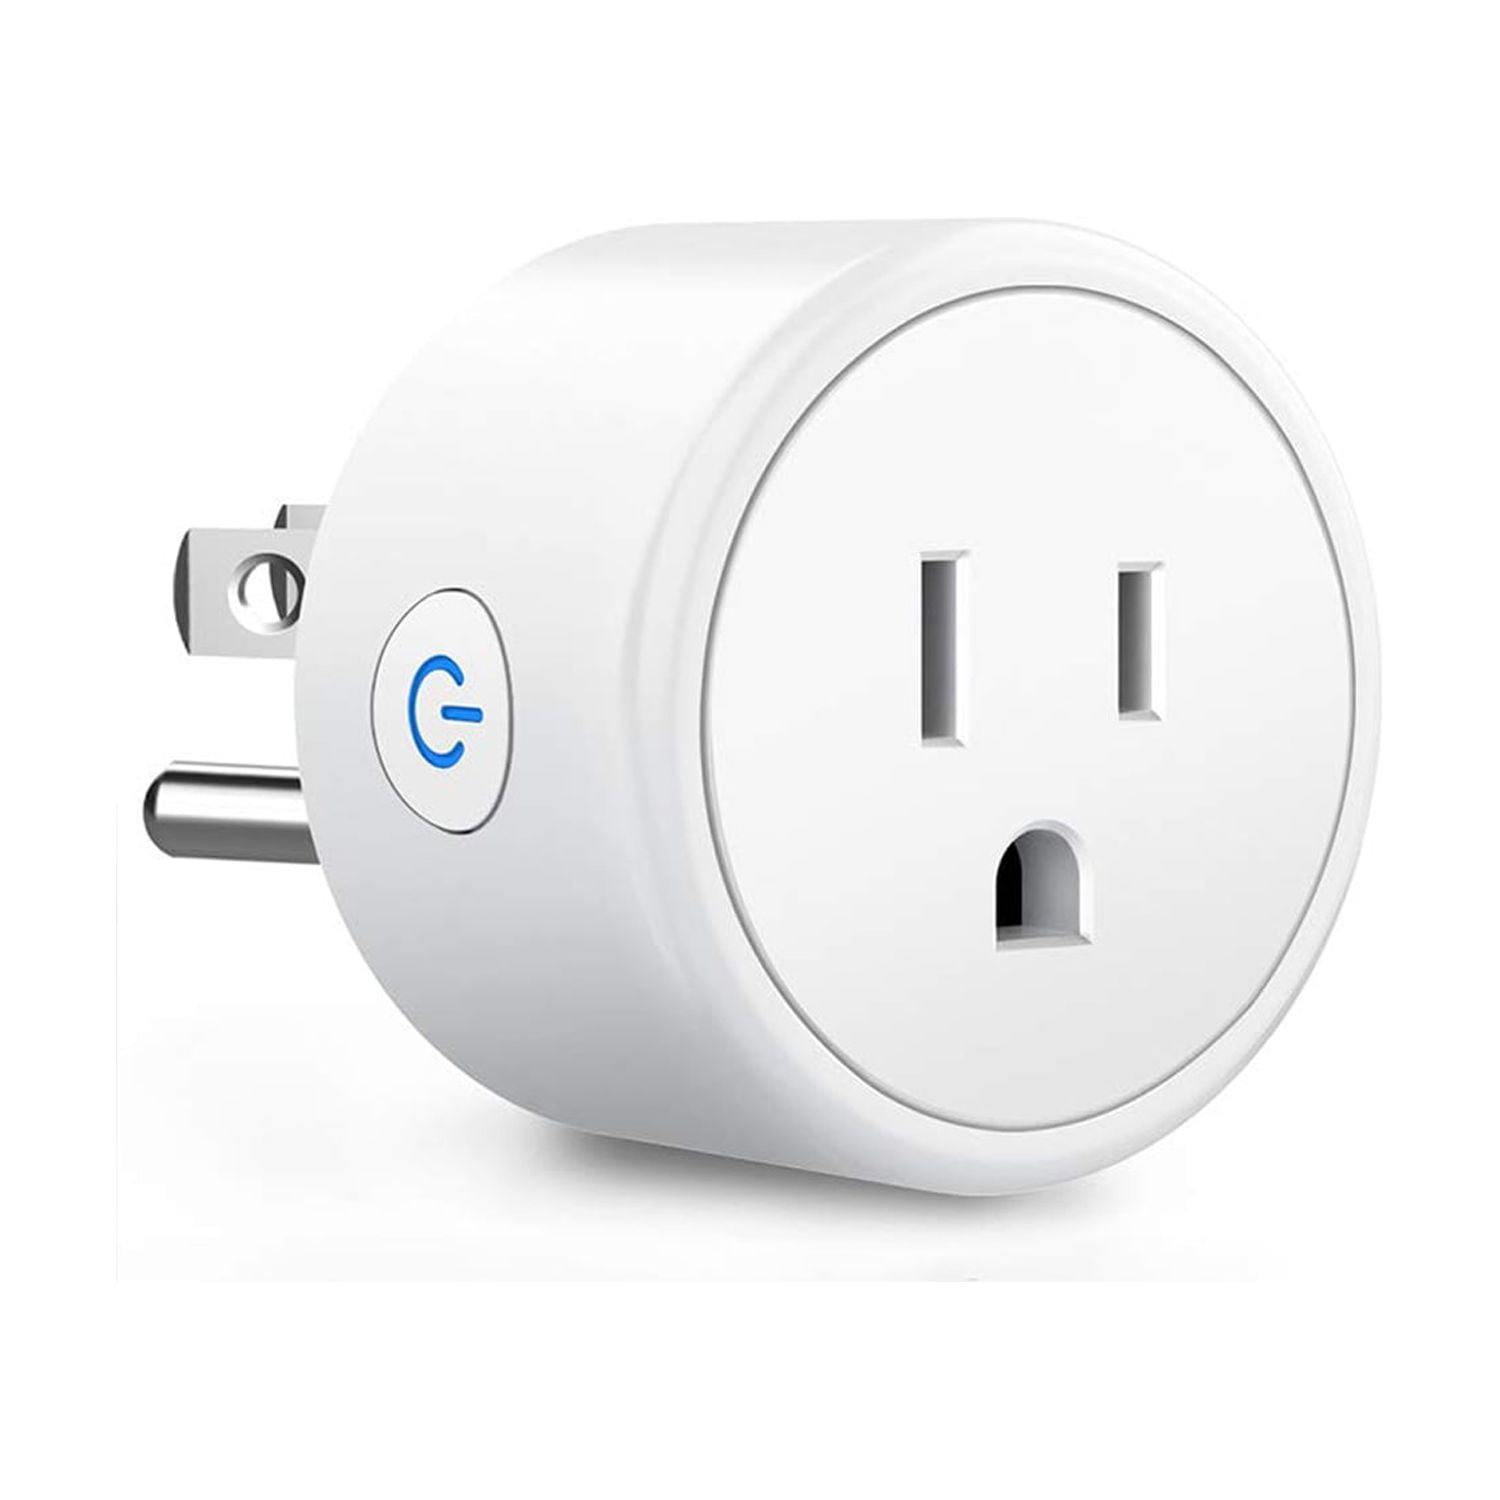 ZMFUTY WiFi Heavy Duty Smart Plug Outlet with Timer Function Lot of 2